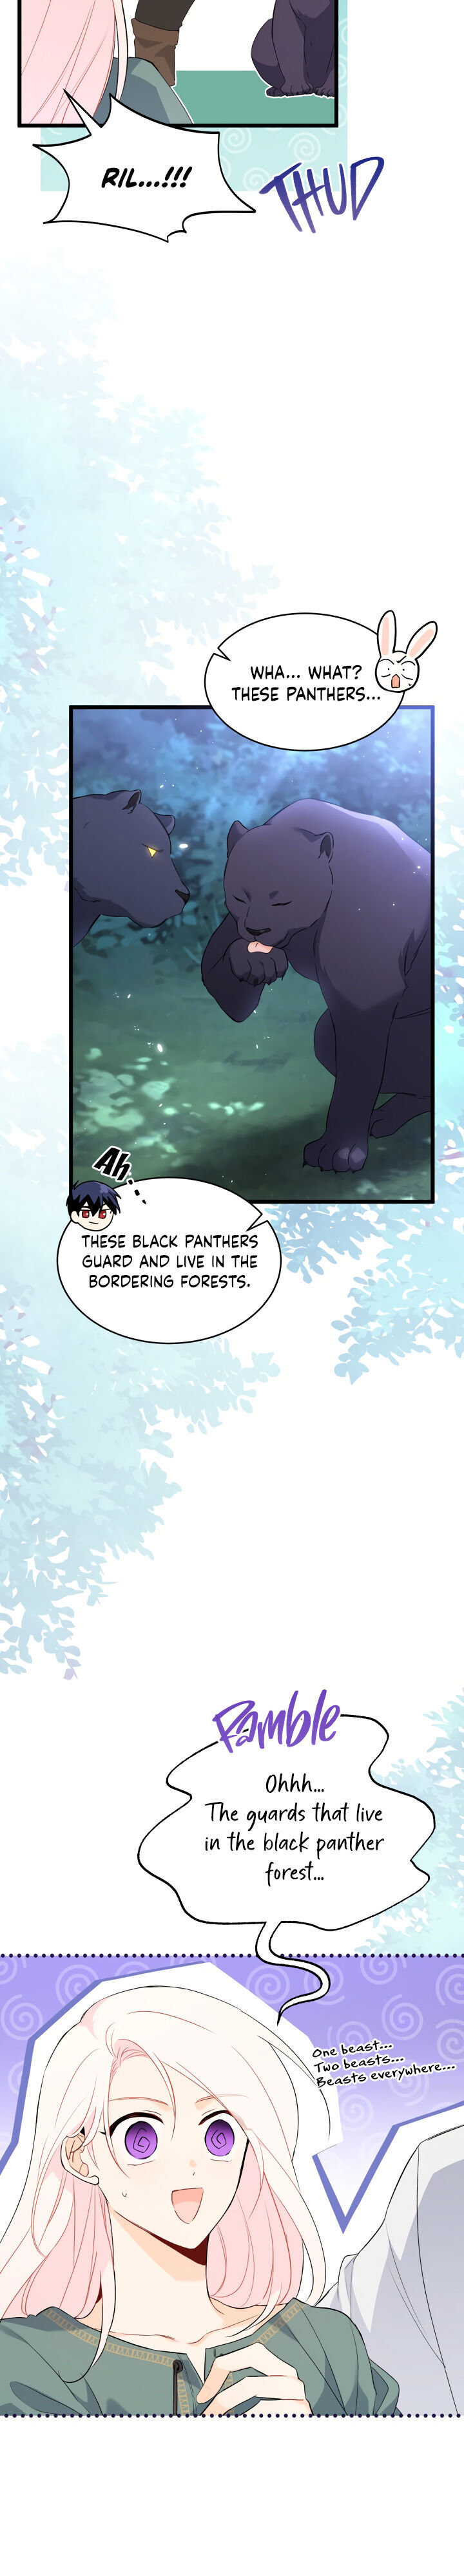 The Symbiotic Relationship Between A Rabbit and A Black Panther - Chapter 51 Page 8